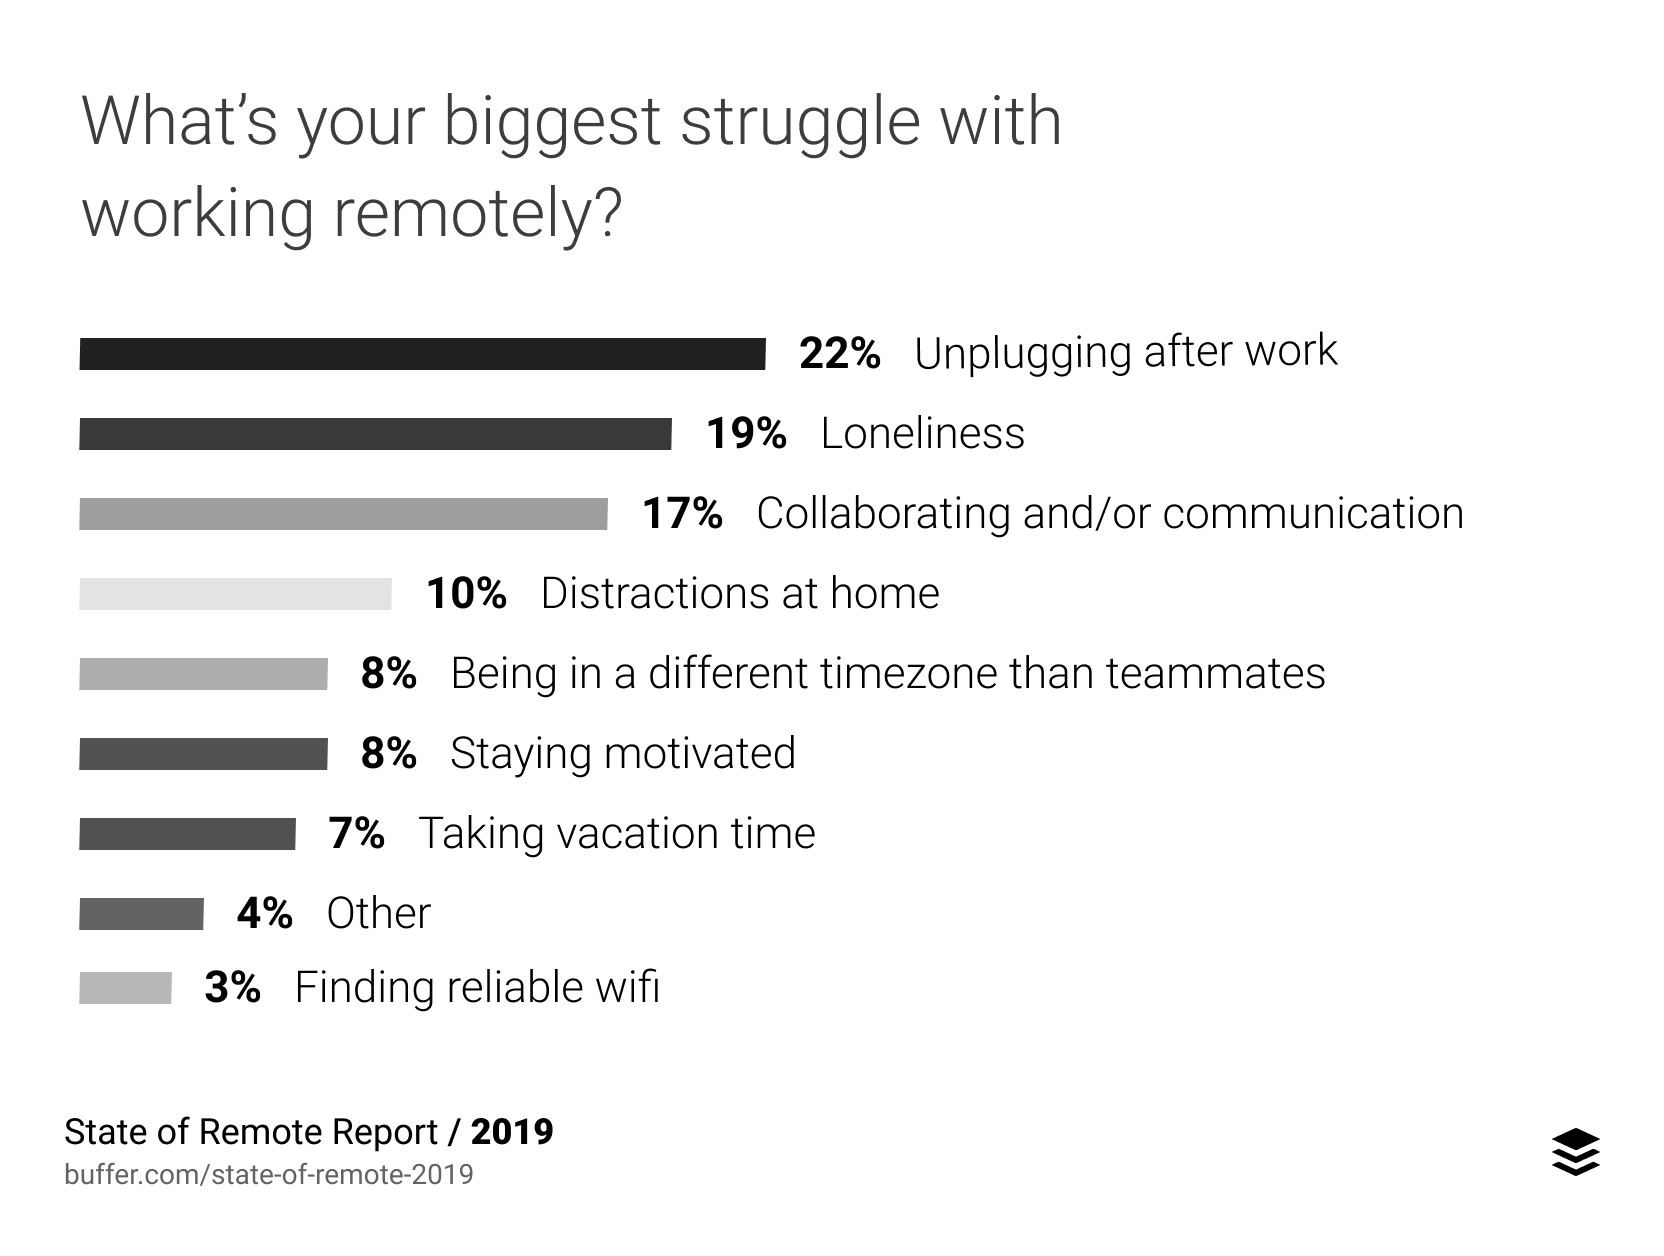 Chart showing the challenges faced by remote workers